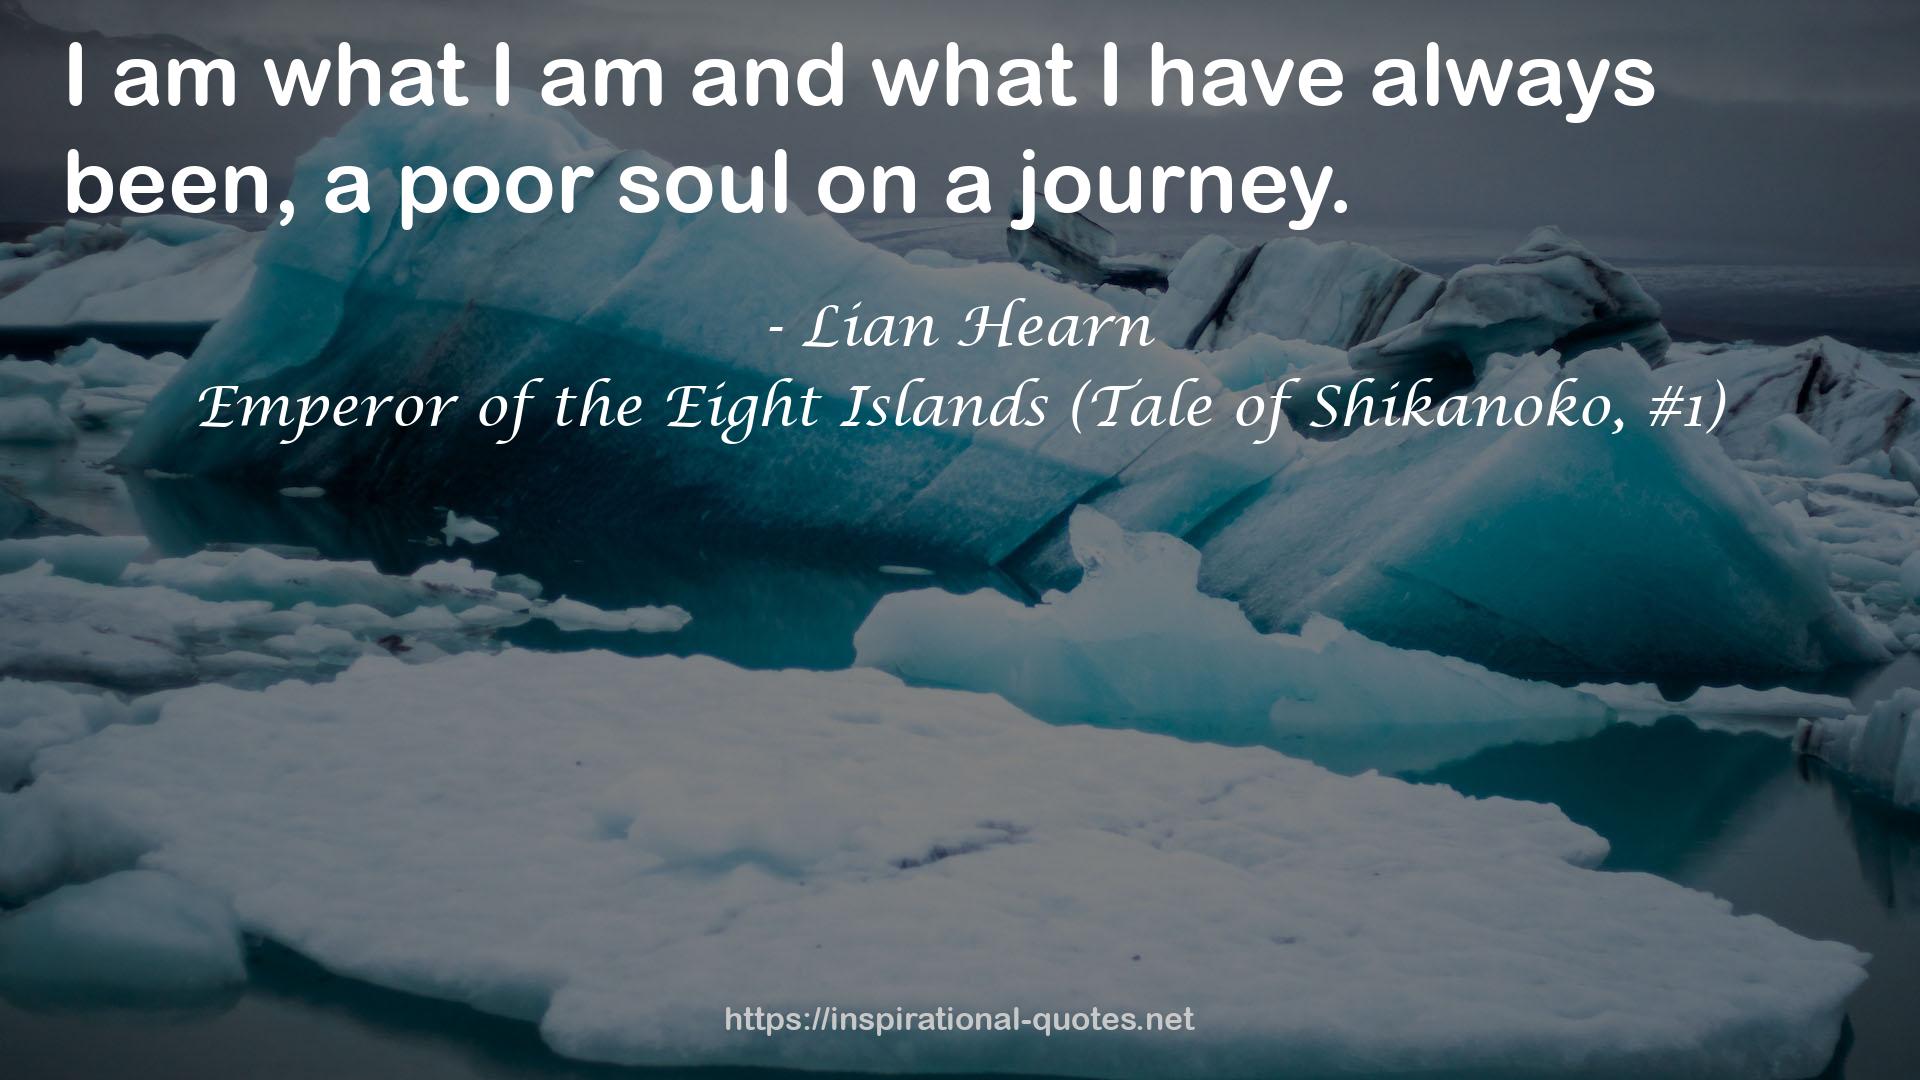 Emperor of the Eight Islands (Tale of Shikanoko, #1) QUOTES